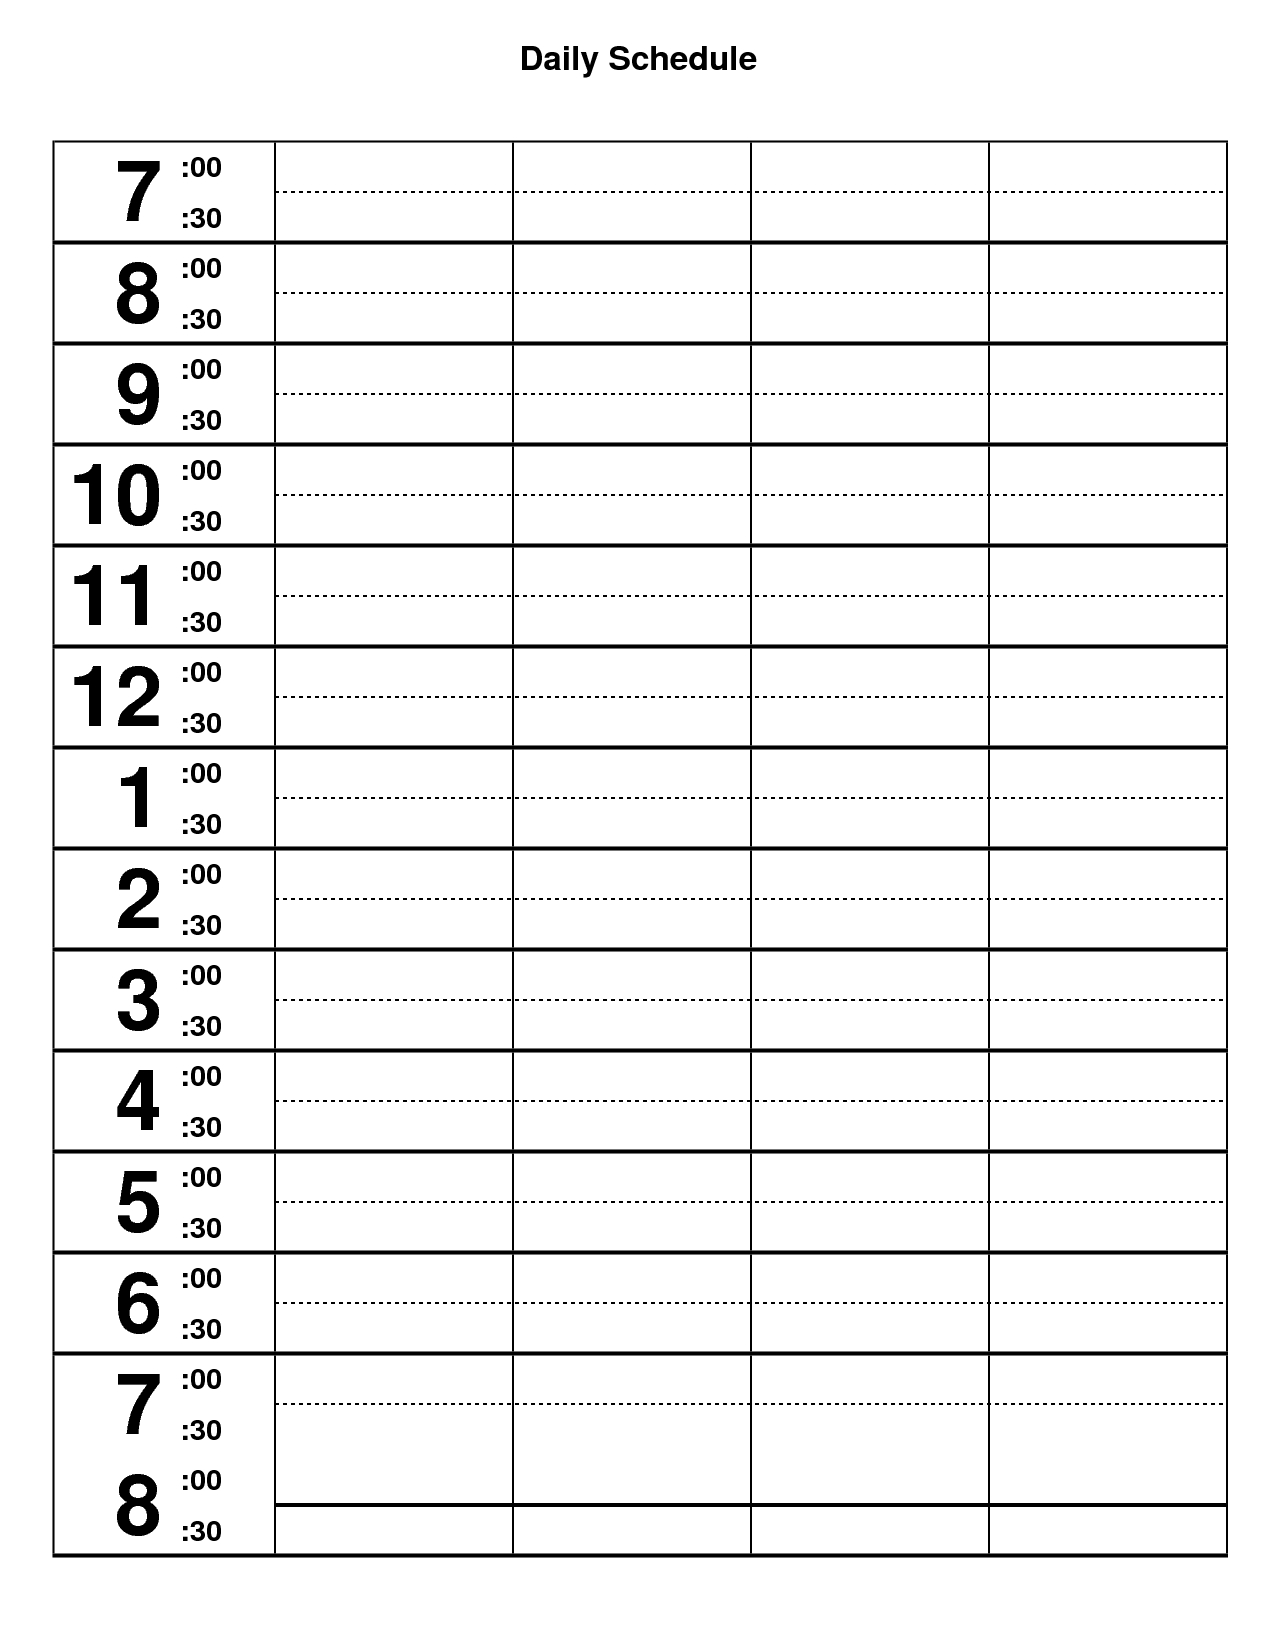 Pingrace Shaped On D.i.y. | Daily Schedule Planner for Daily Schedule Printable Template Classroom